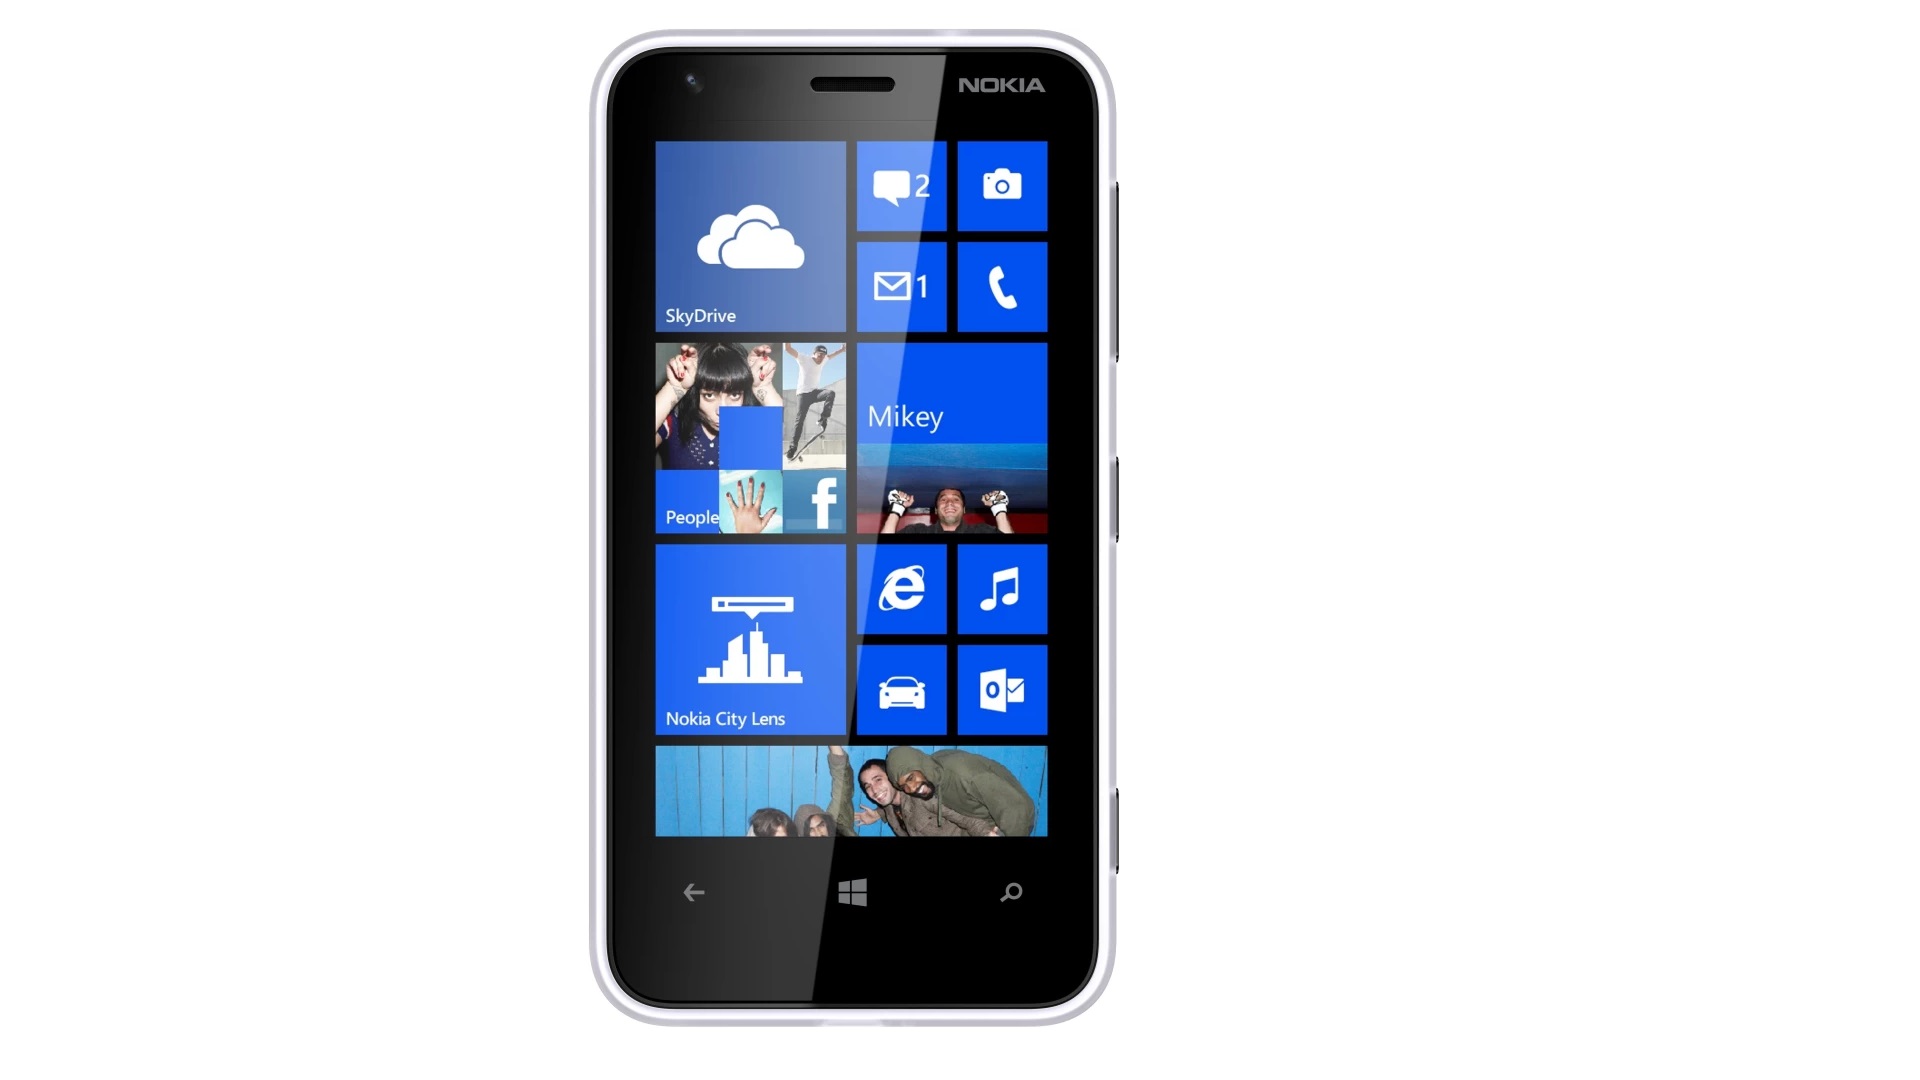 Nokia Lumia 620 is Available for Pre-order in the UK